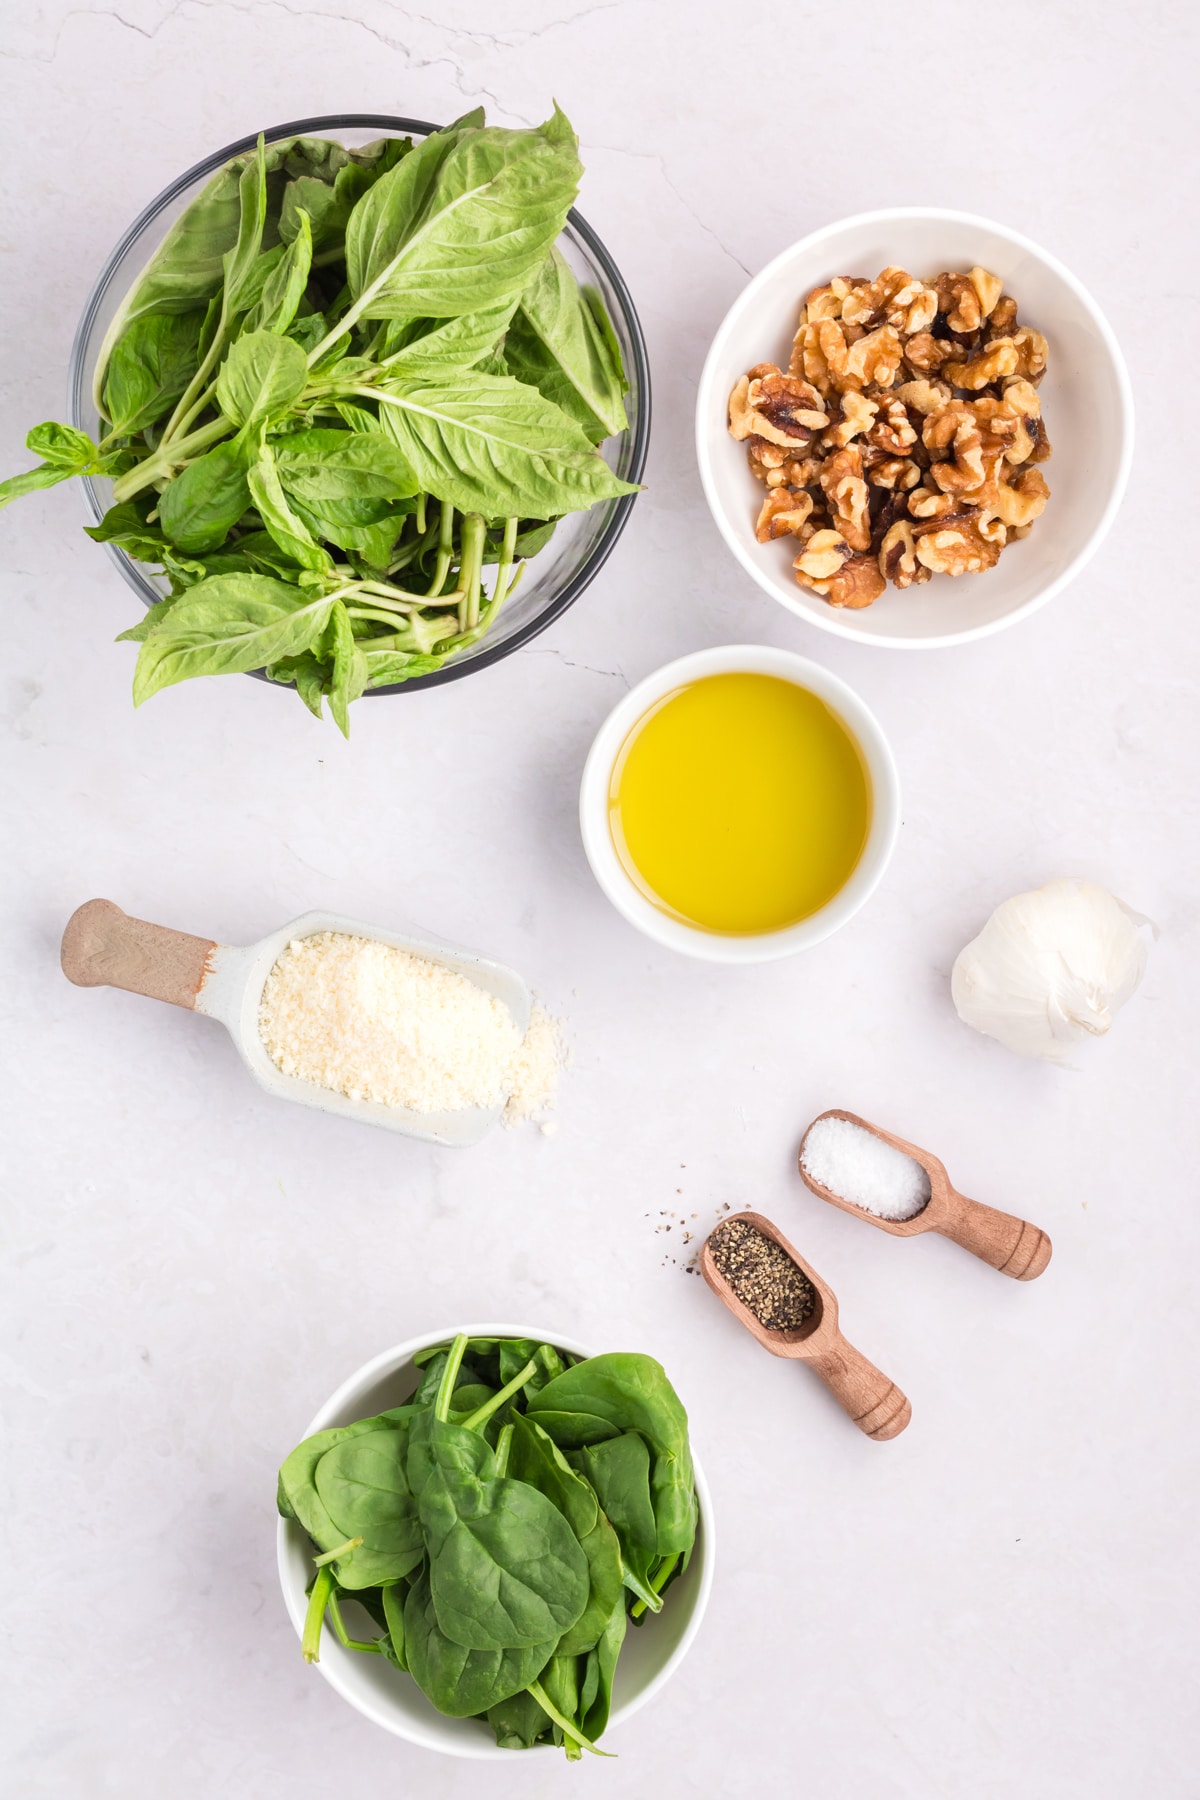 Ingredients for a spinach homemade pesto recipe on a white background.